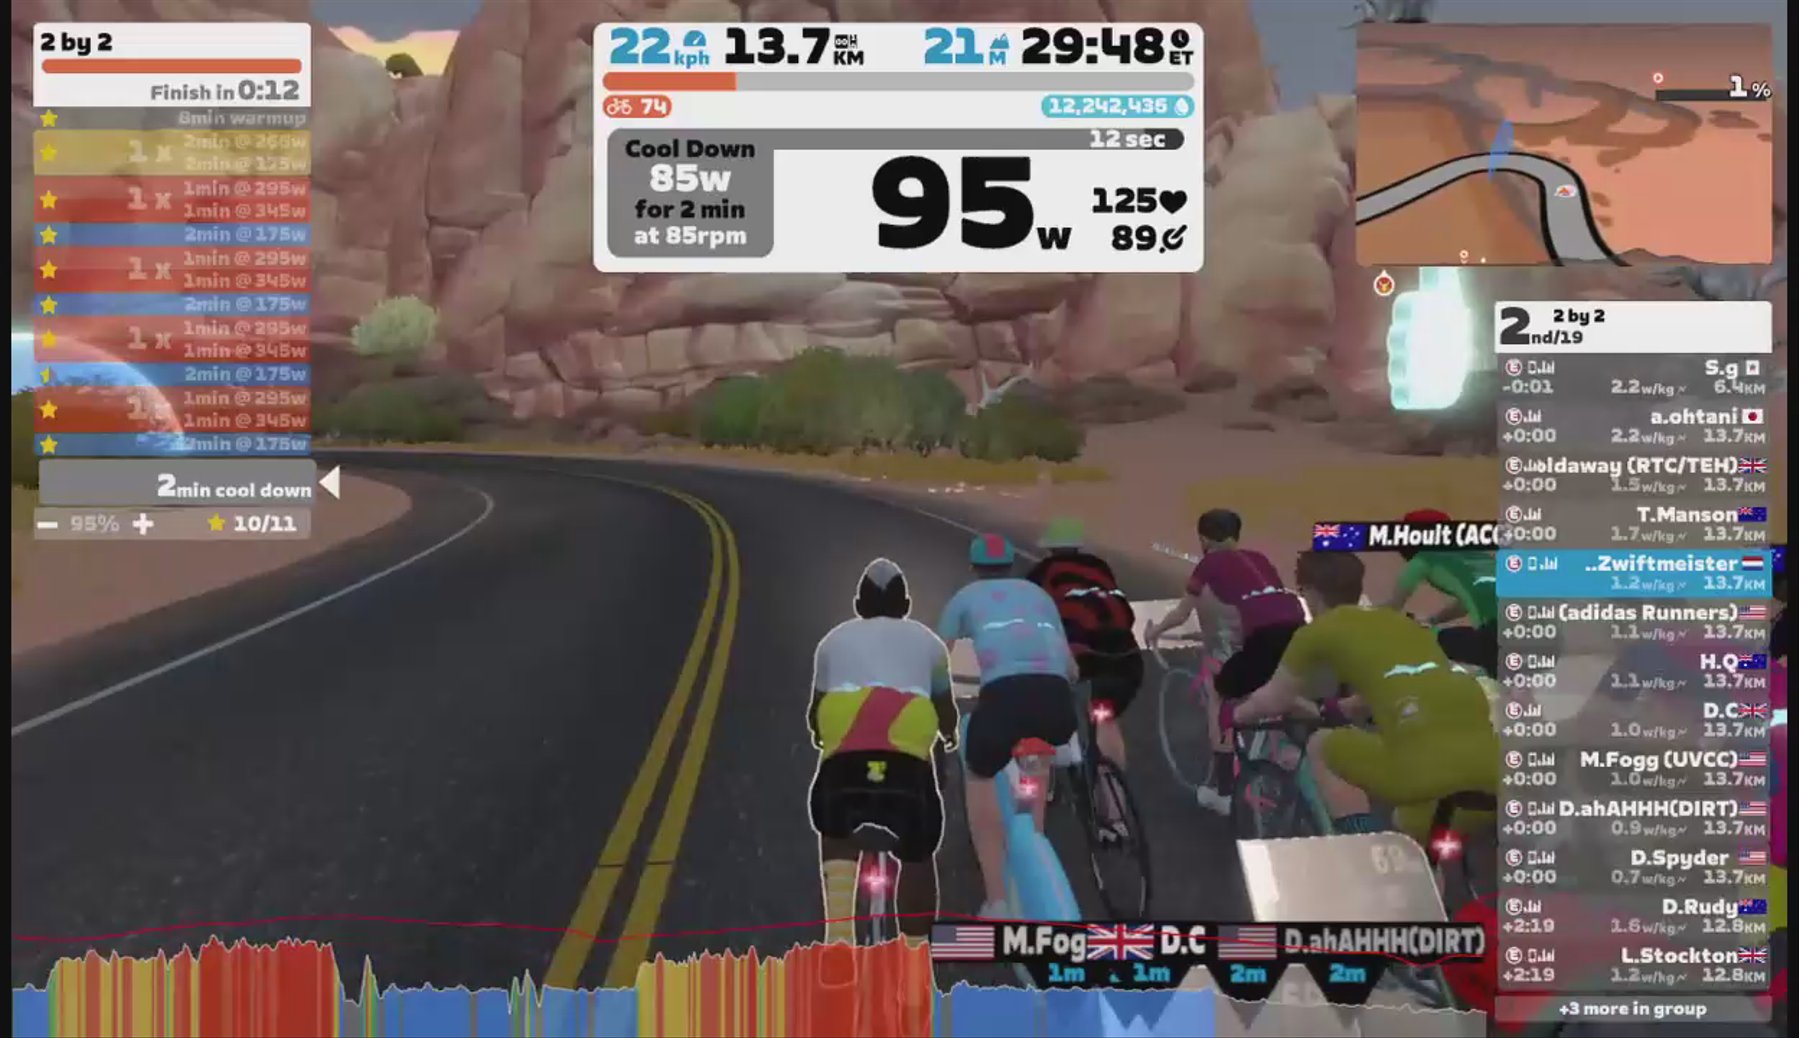 Zwift - Group Workout: 2 by 2 on Tempus Fugit in Watopia